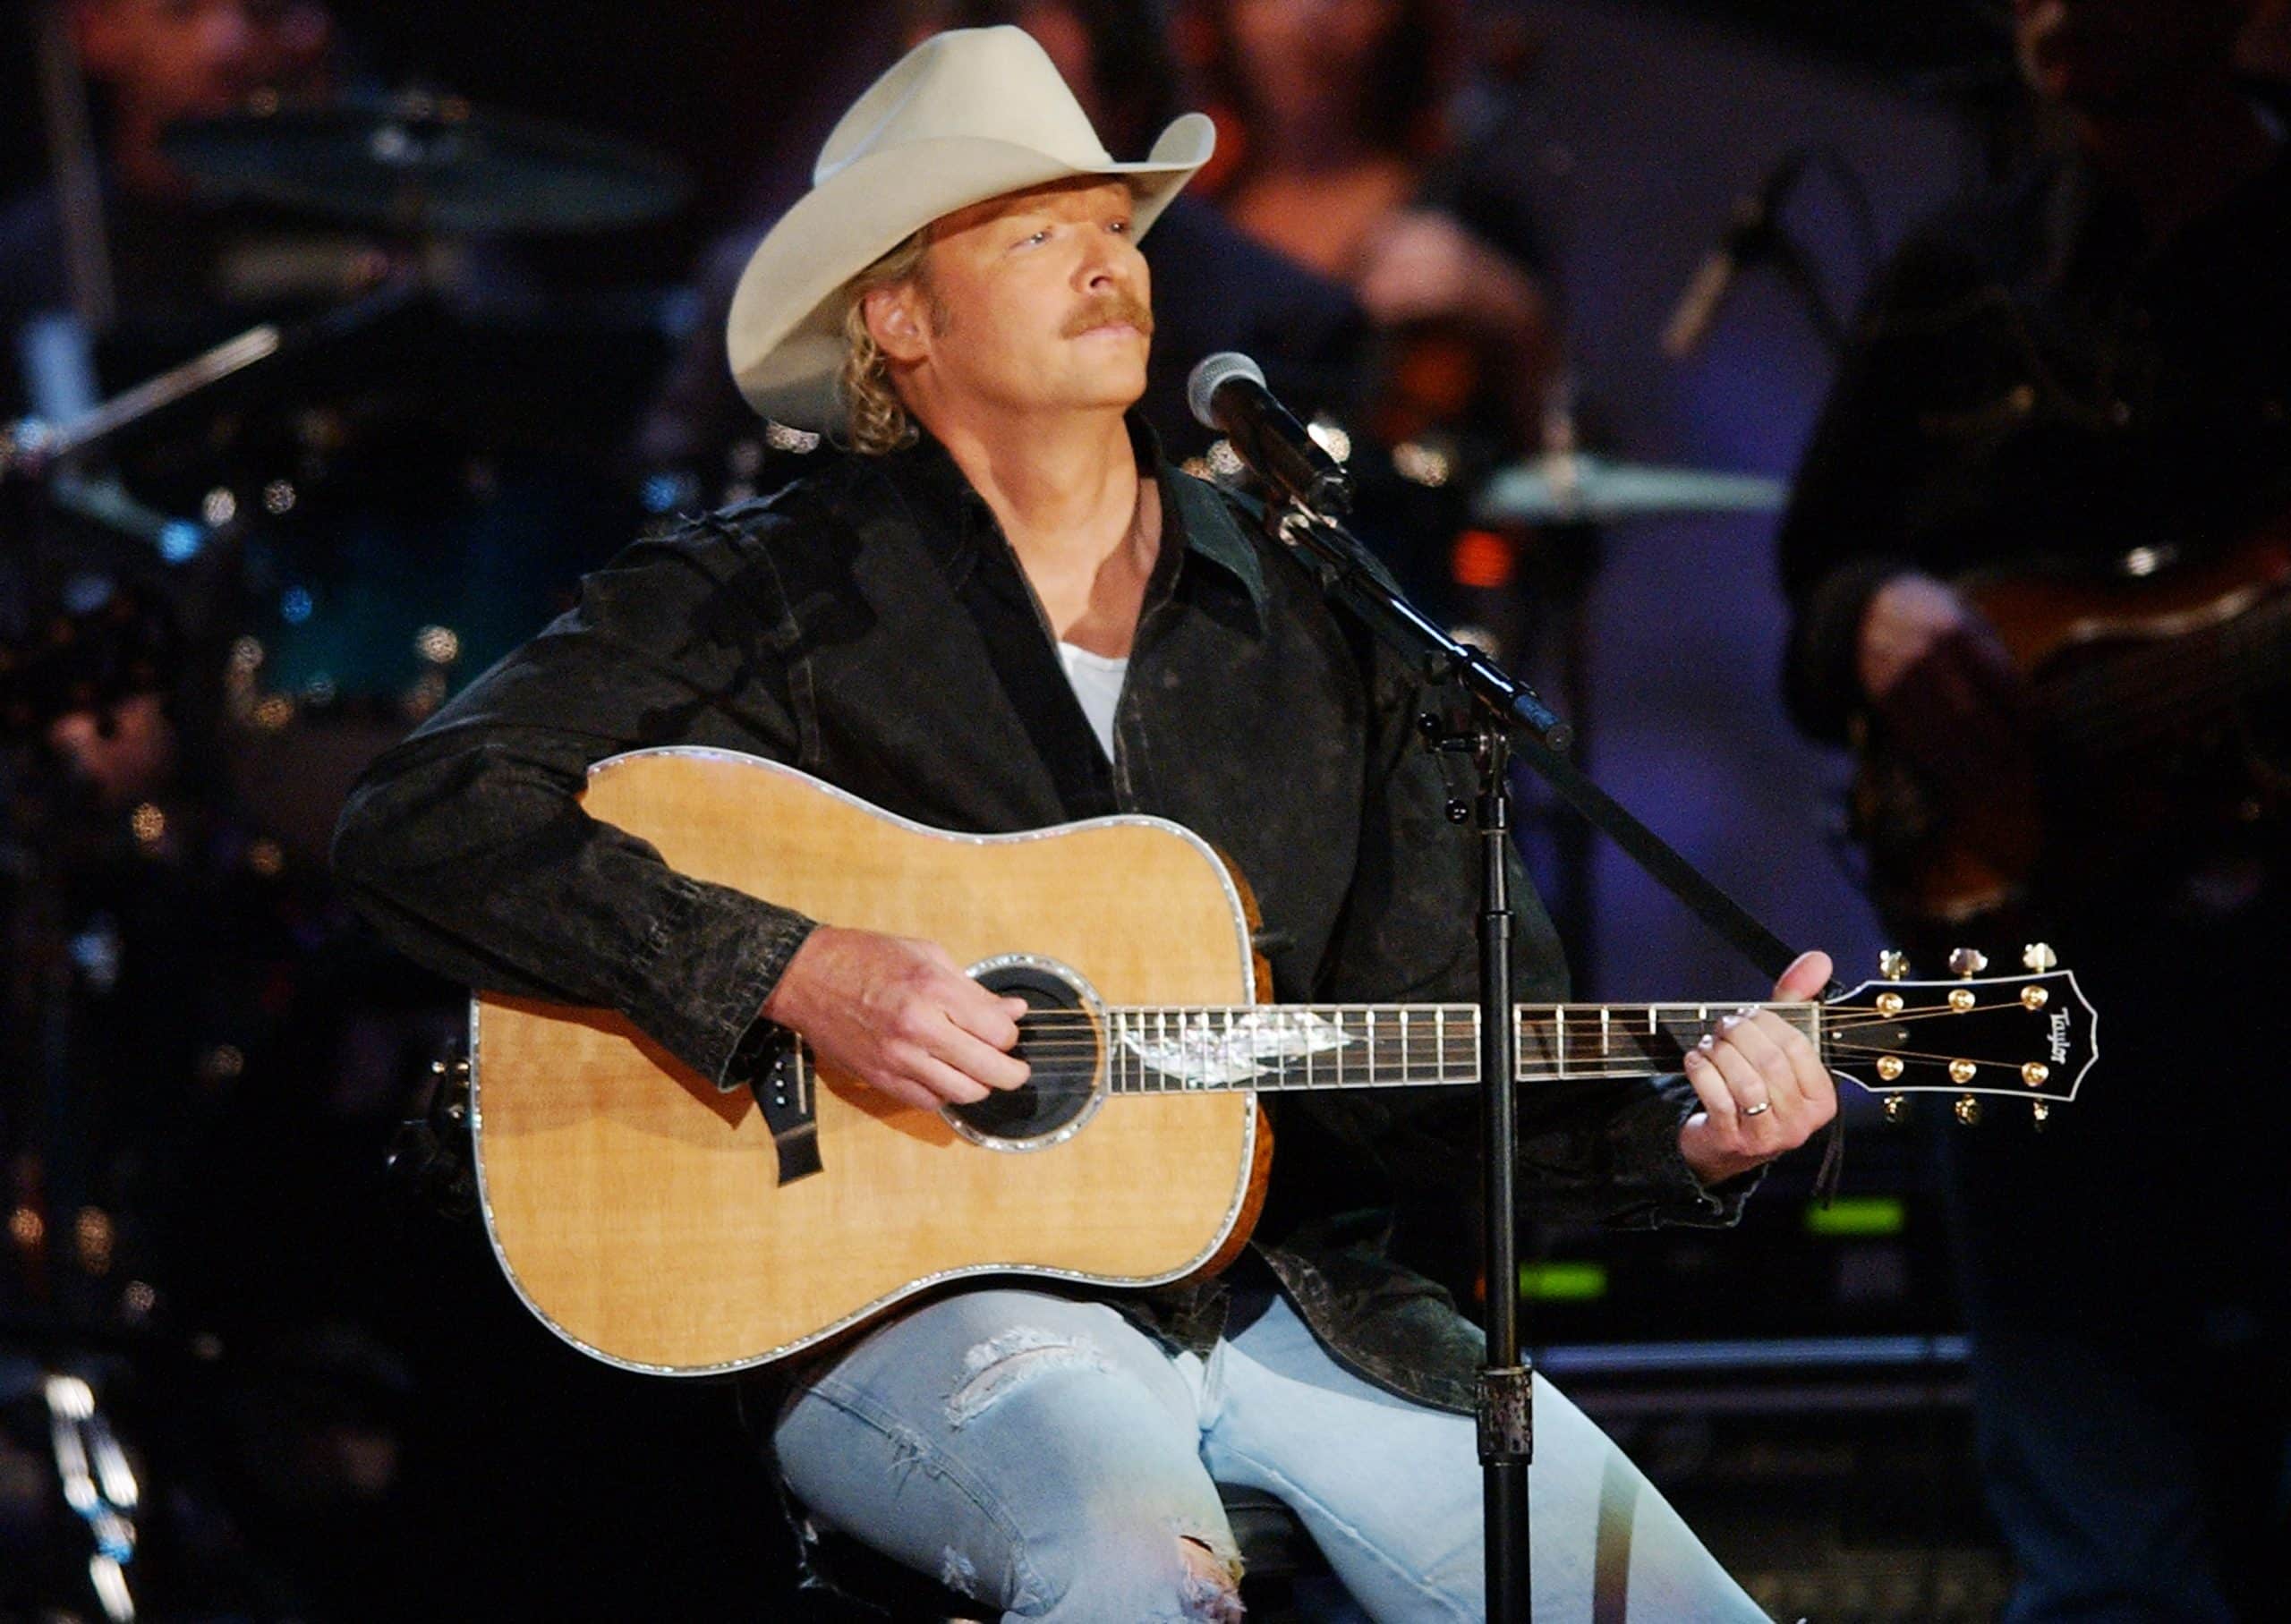 Alan Jackson performs "Remember When" during 31st Annual American Music Awards - Show at The Shrine Theater in Los Angeles, California, United States. (Photo by M. Caulfield/WireImage)